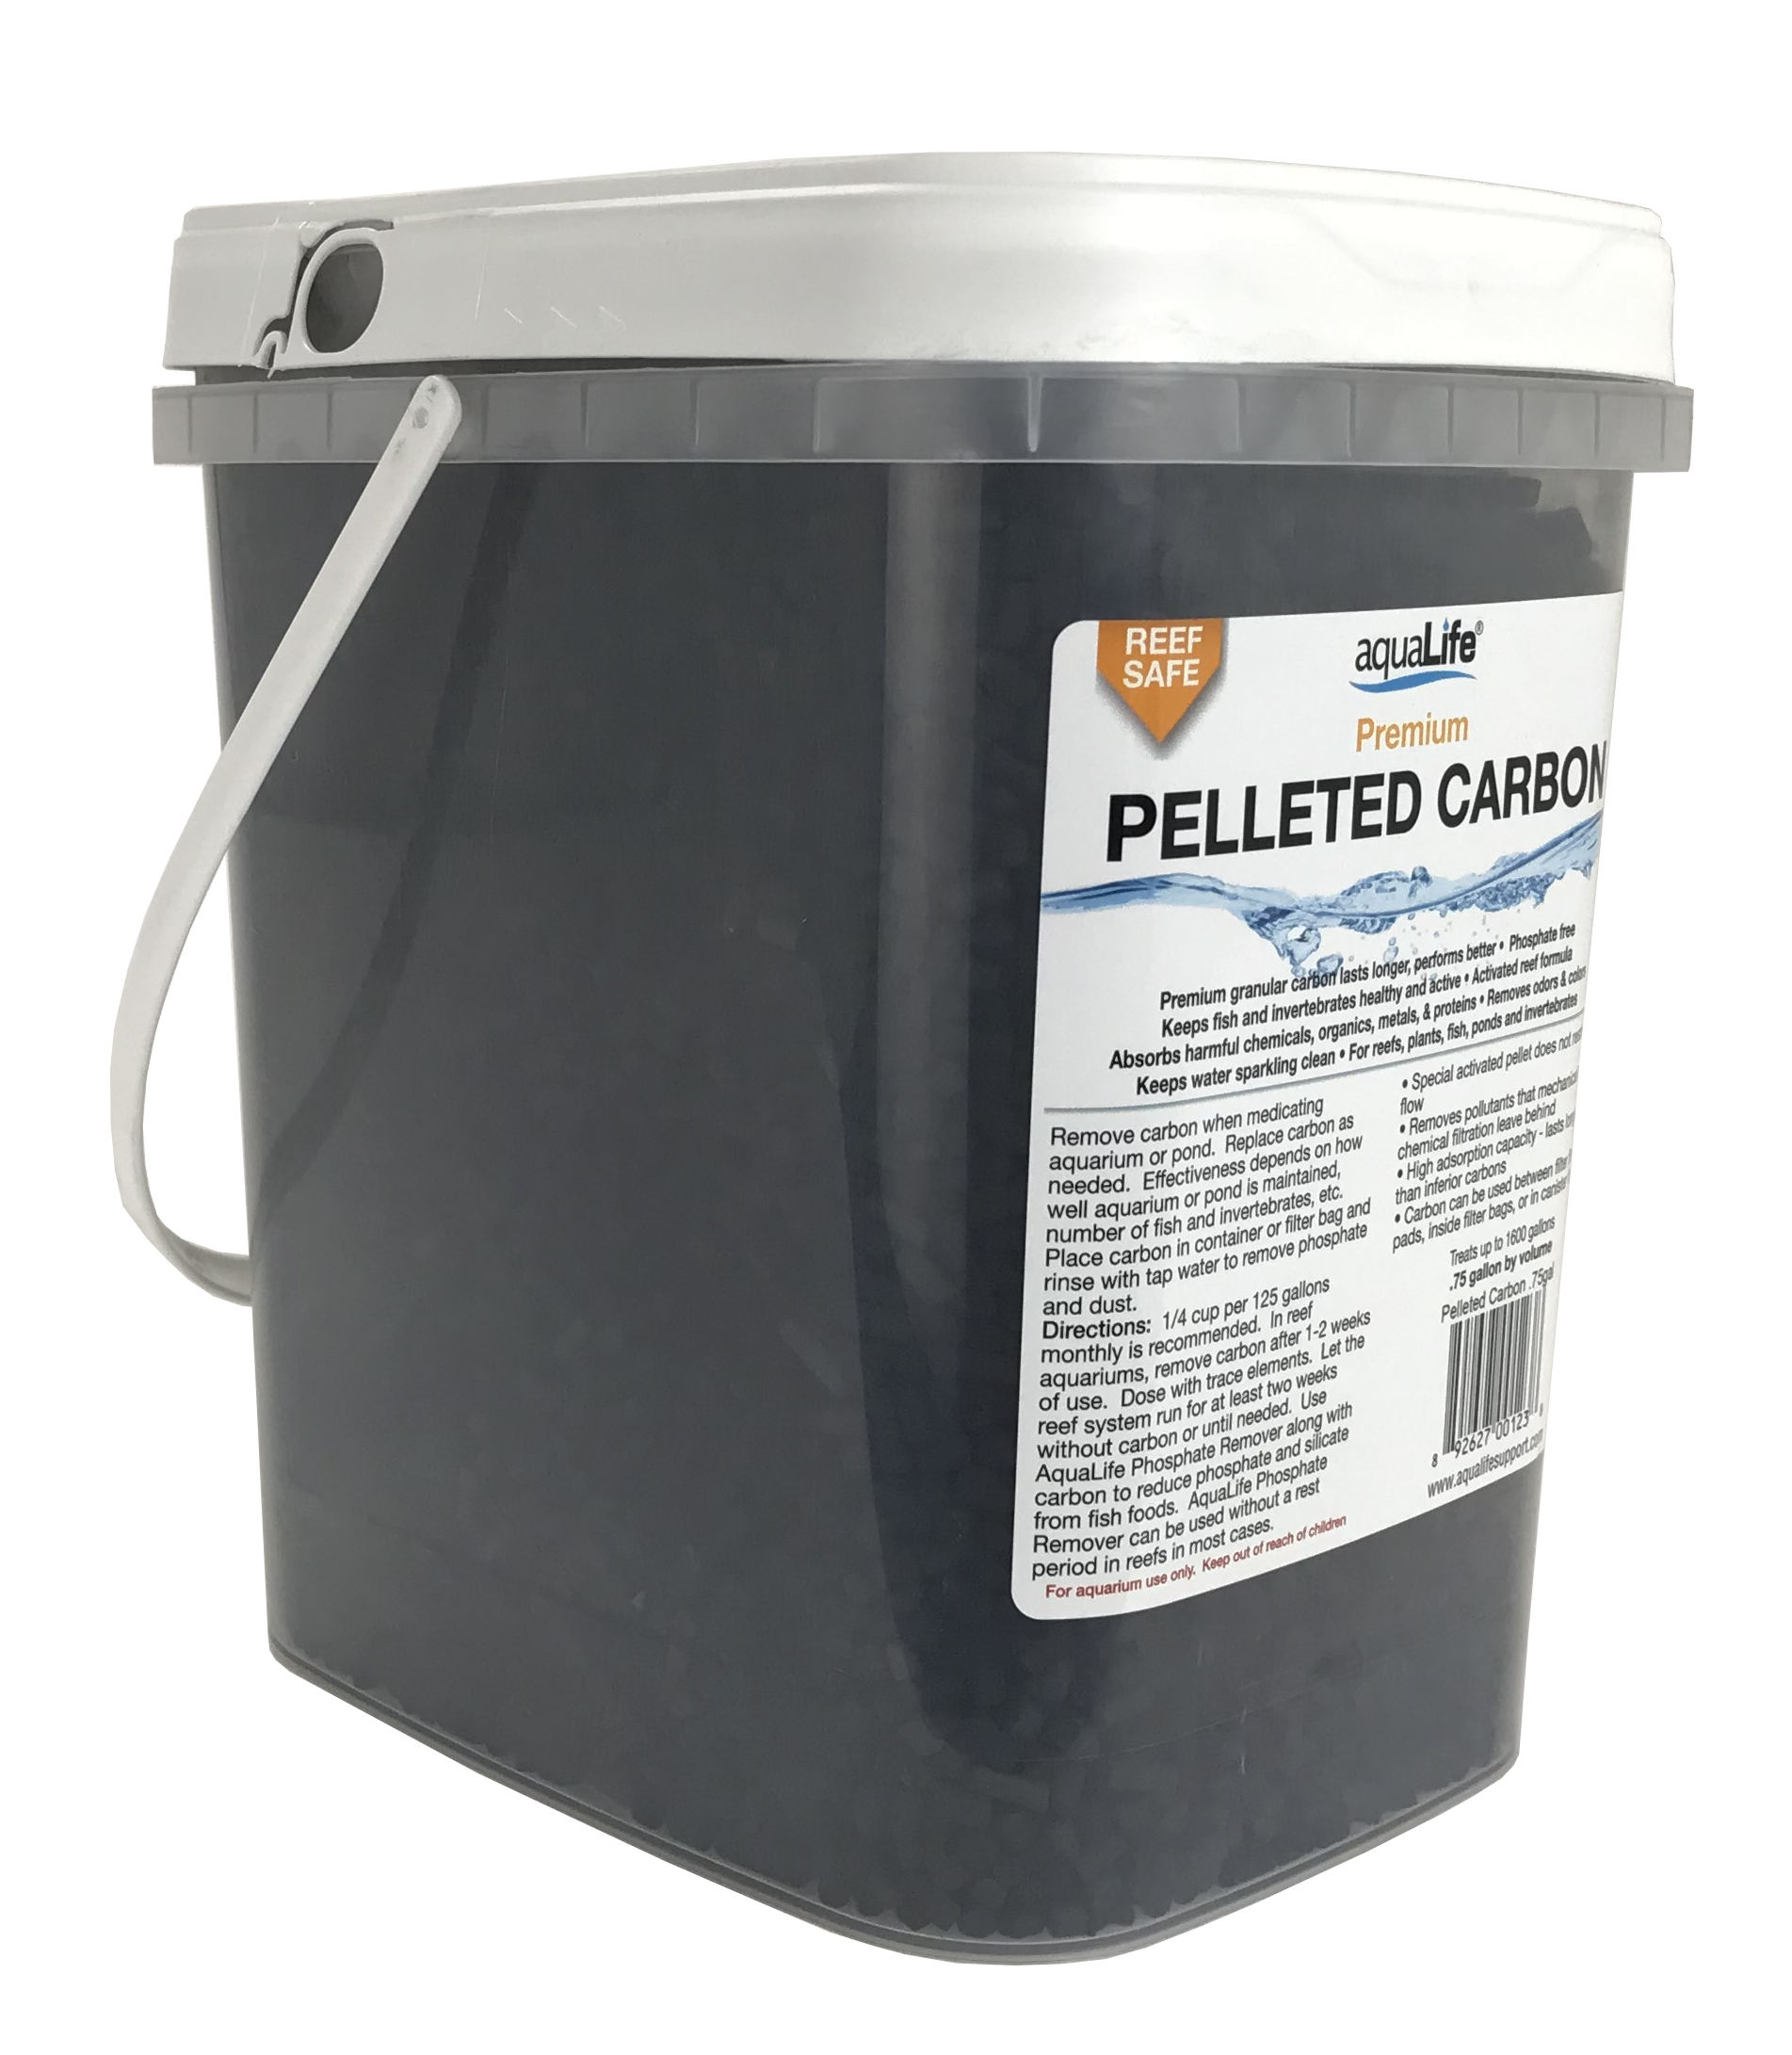 Premium Pelleted Carbon - Treats up to 1600 Gallons .75 Gallons